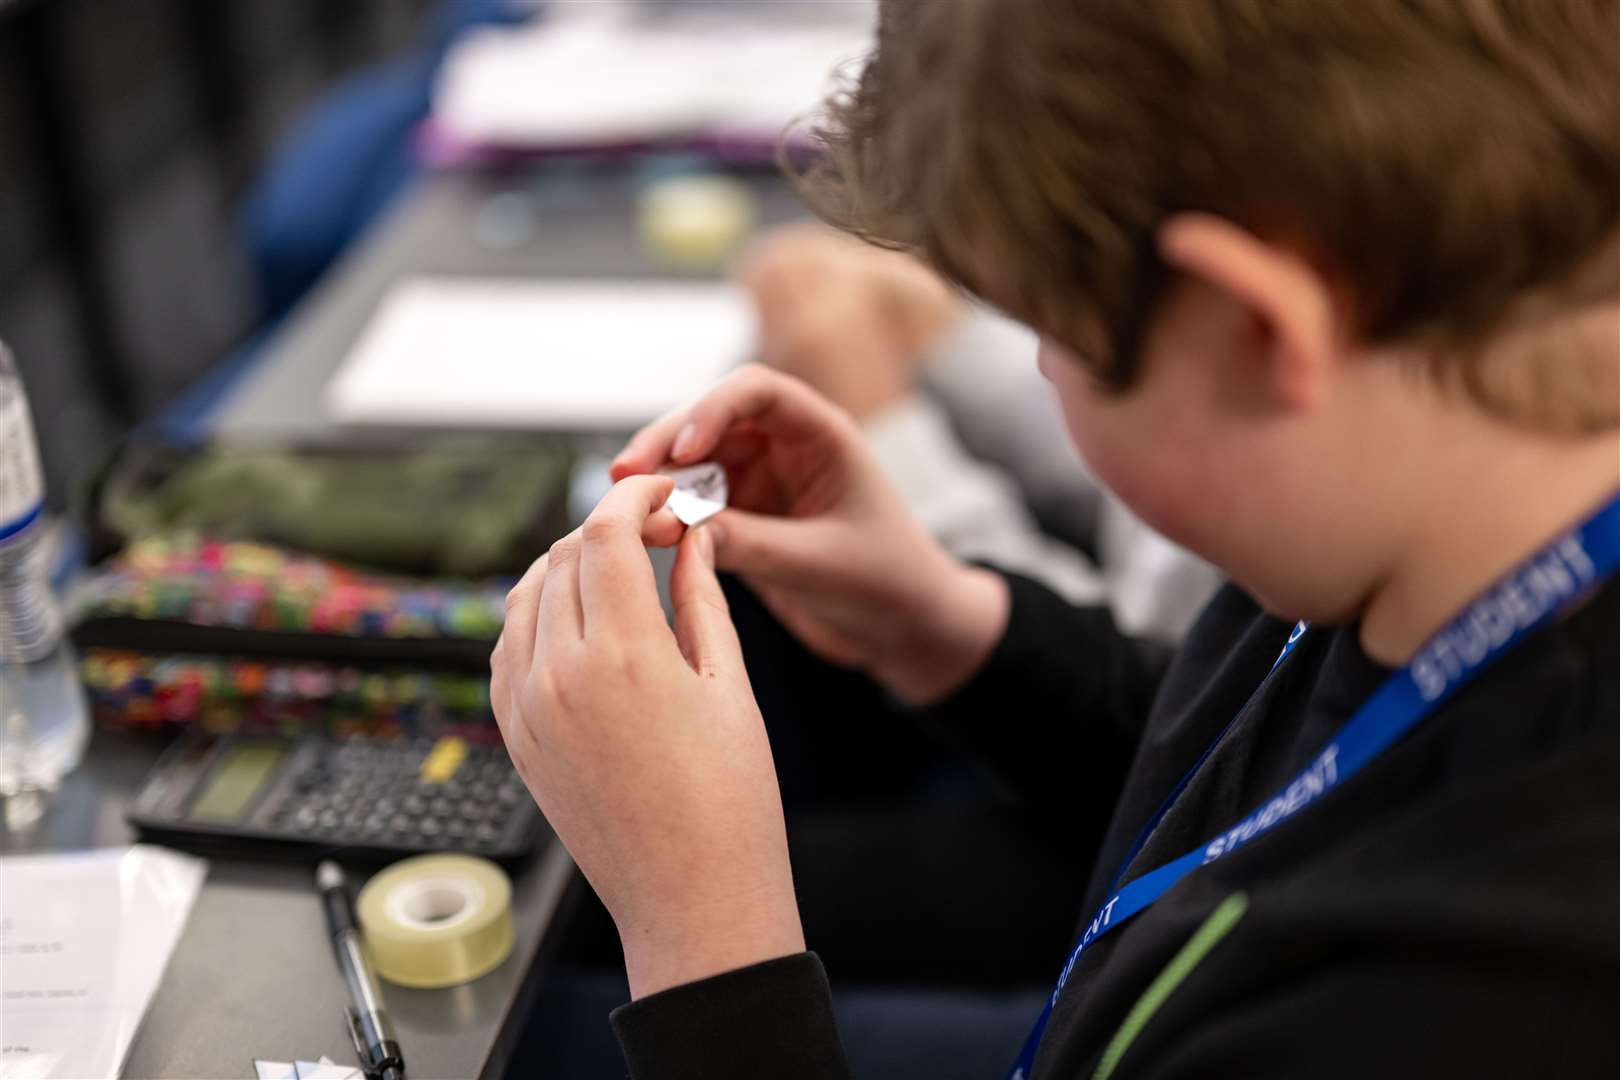 Maths teachers are invited to nominate S2 pupils to take part in TechFest’s Maths Masterclass series. Picture: Michal Wachucik/Abermedia Ltd